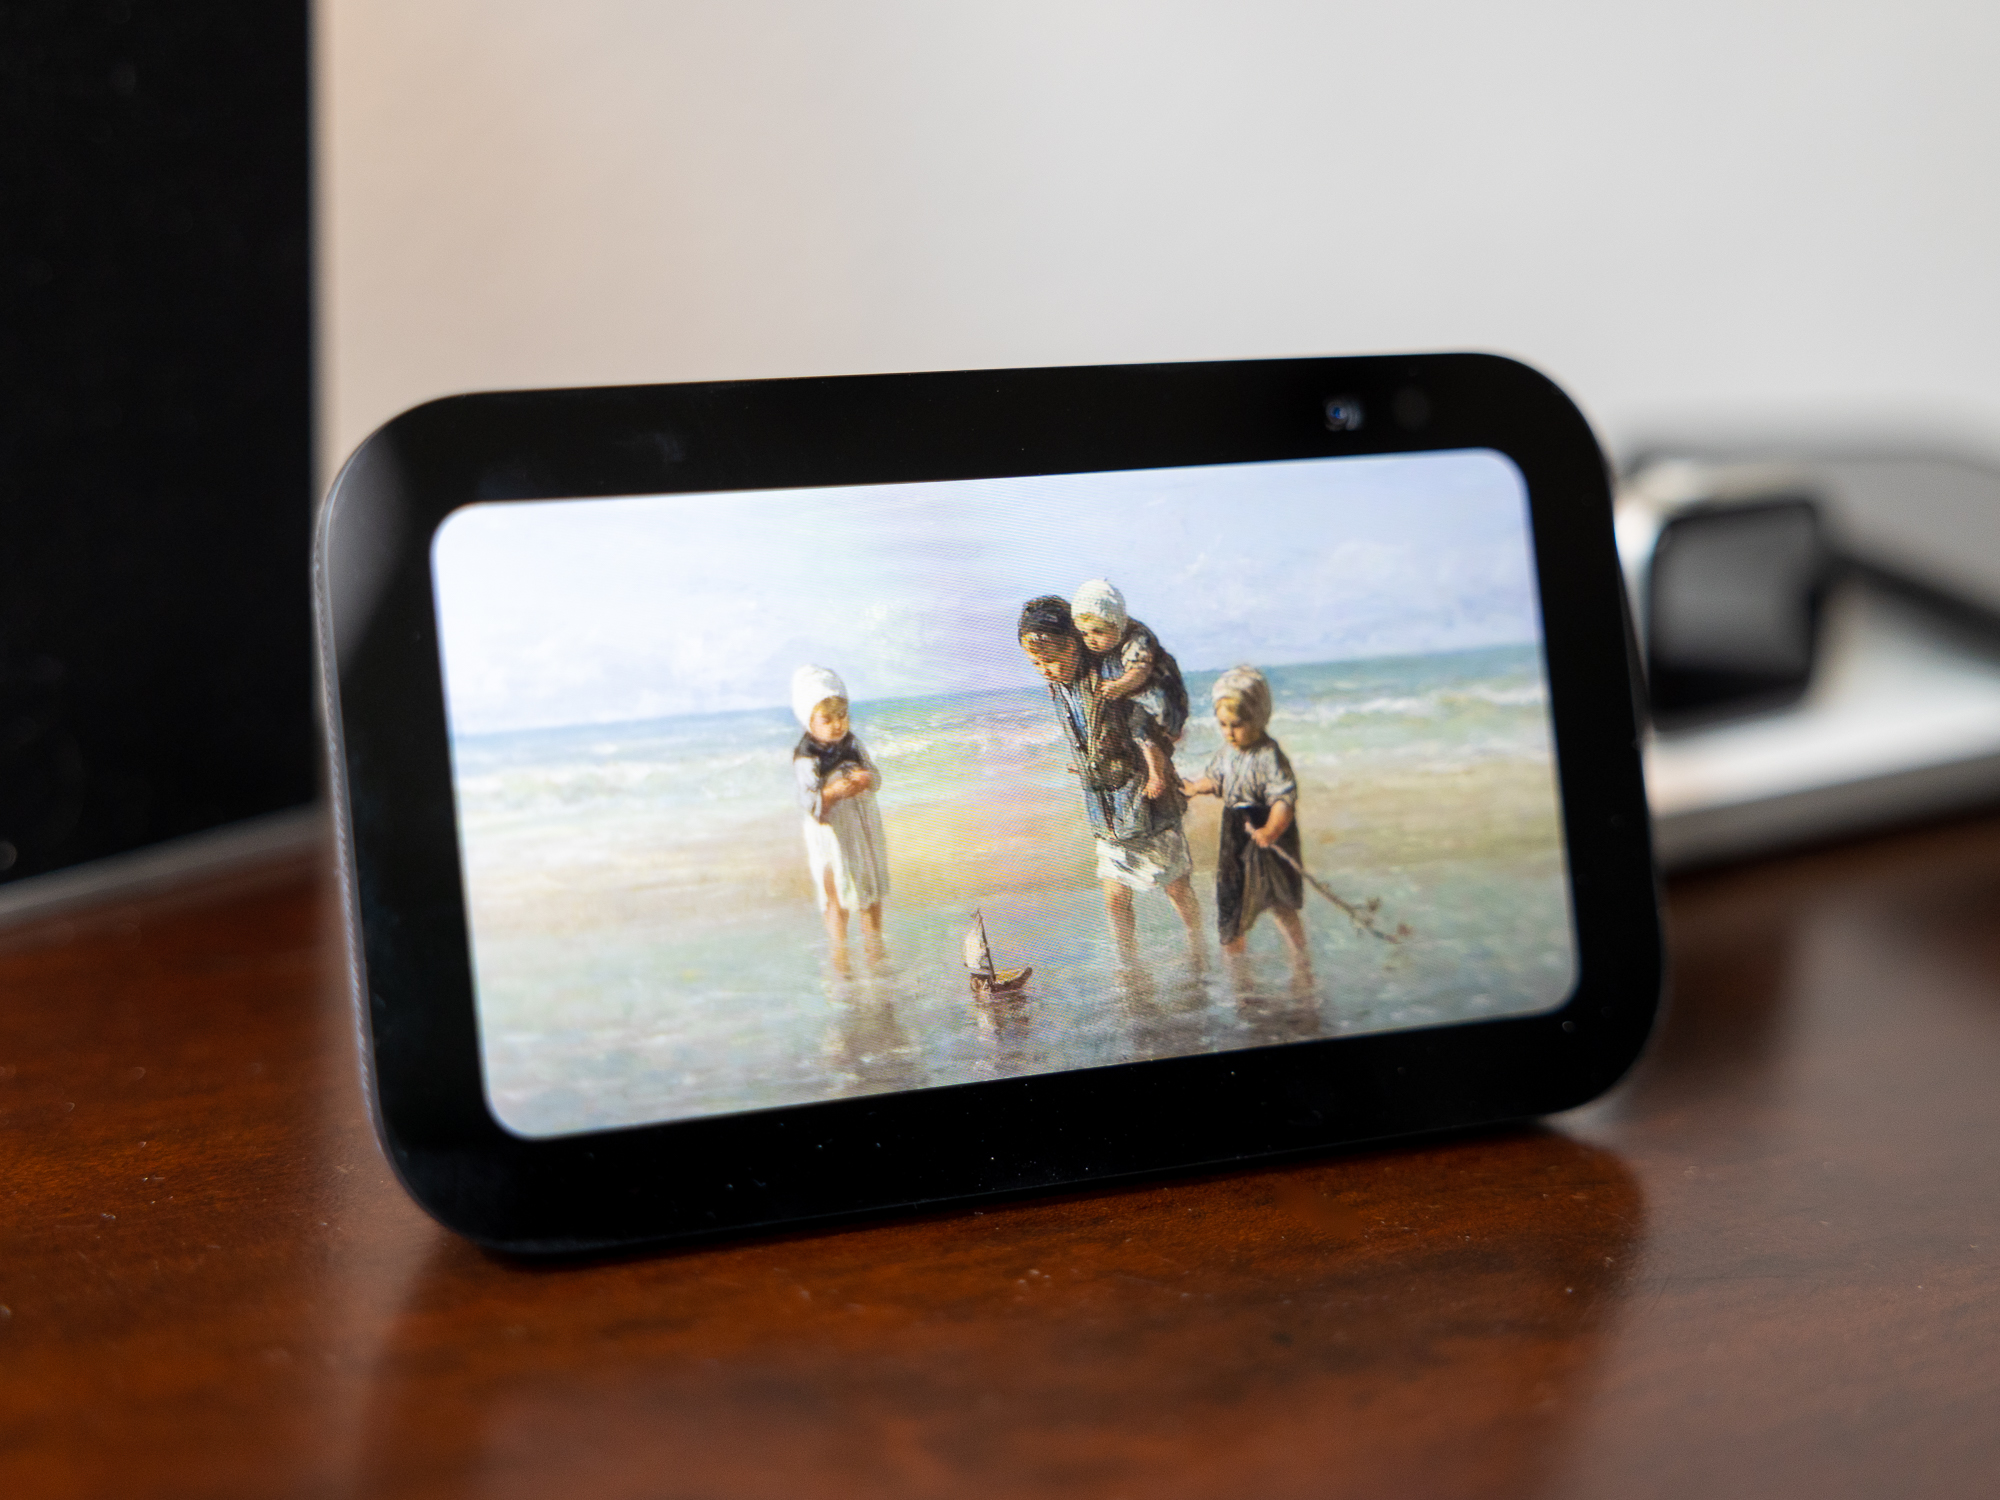 device deals include an Echo Show 5 and smart bulb